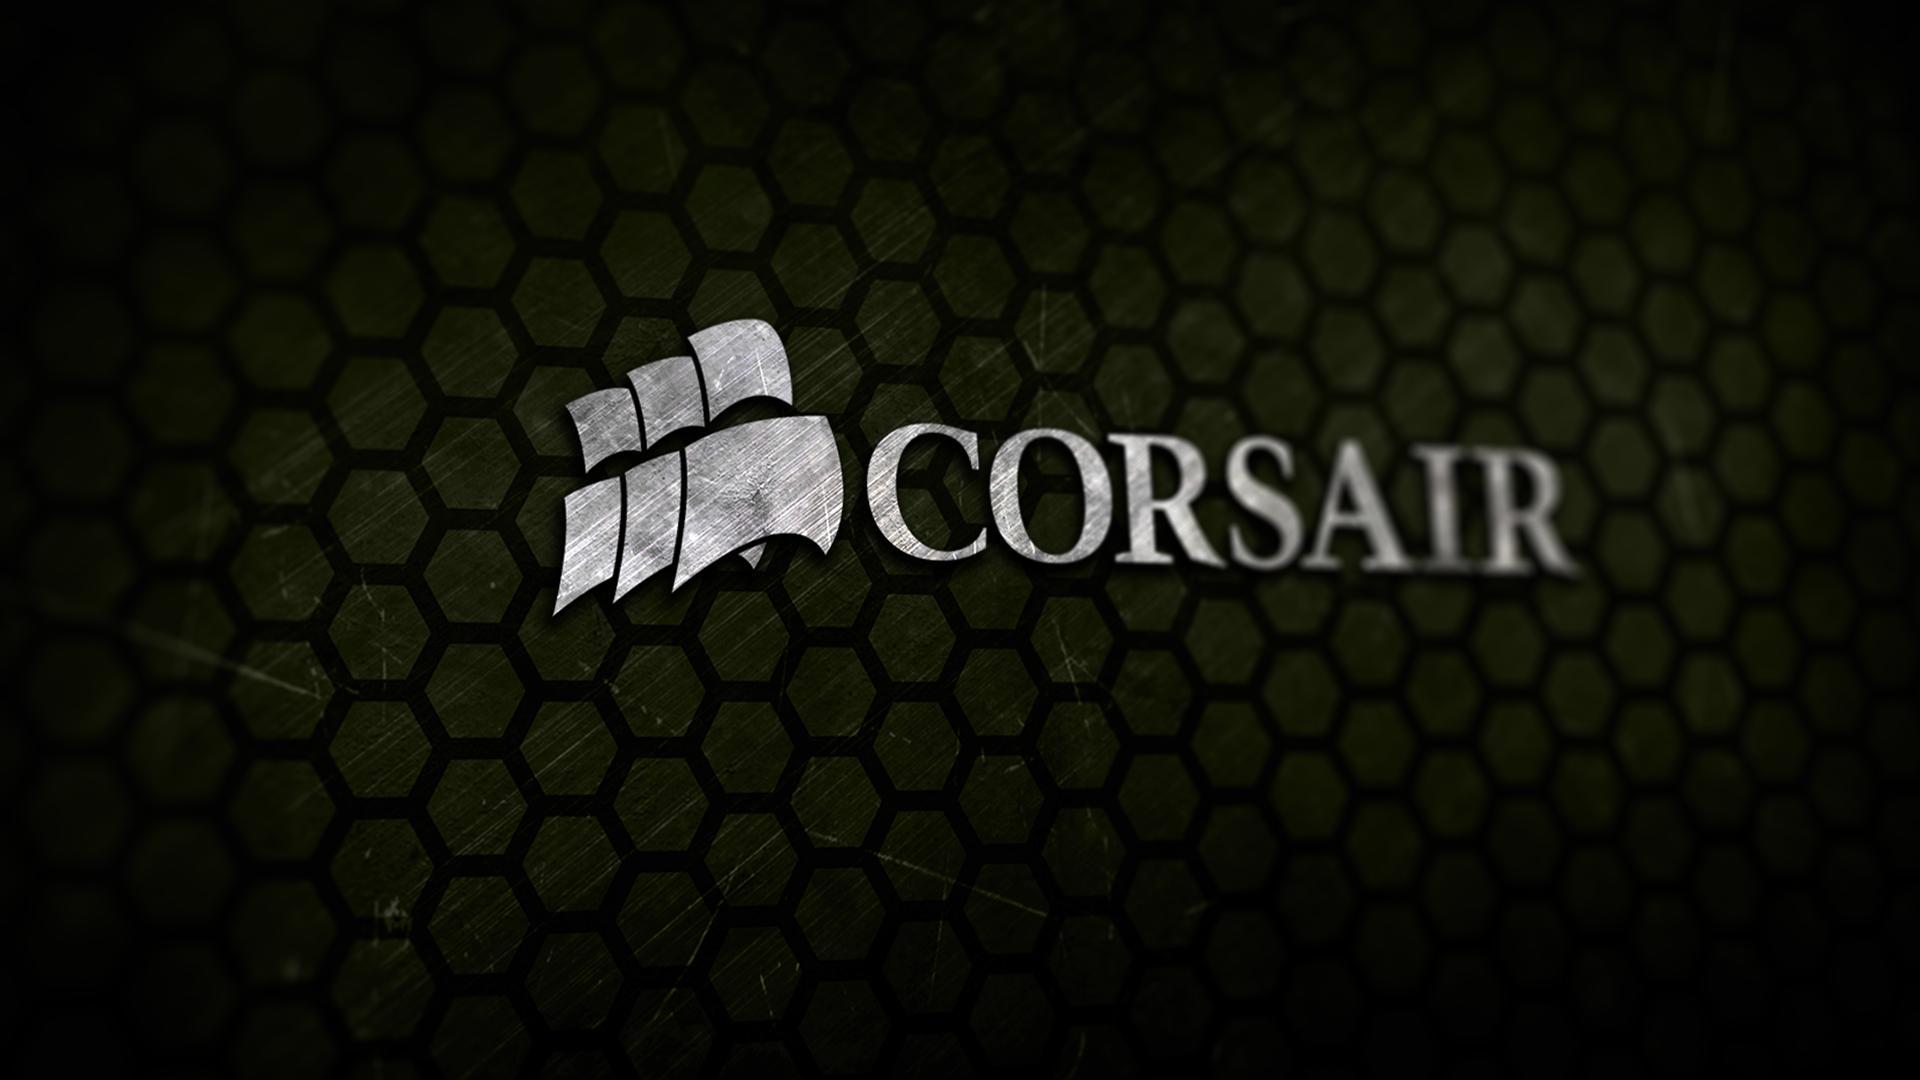 CORSAIR  Have you checked out our latest wallpapers   Facebook